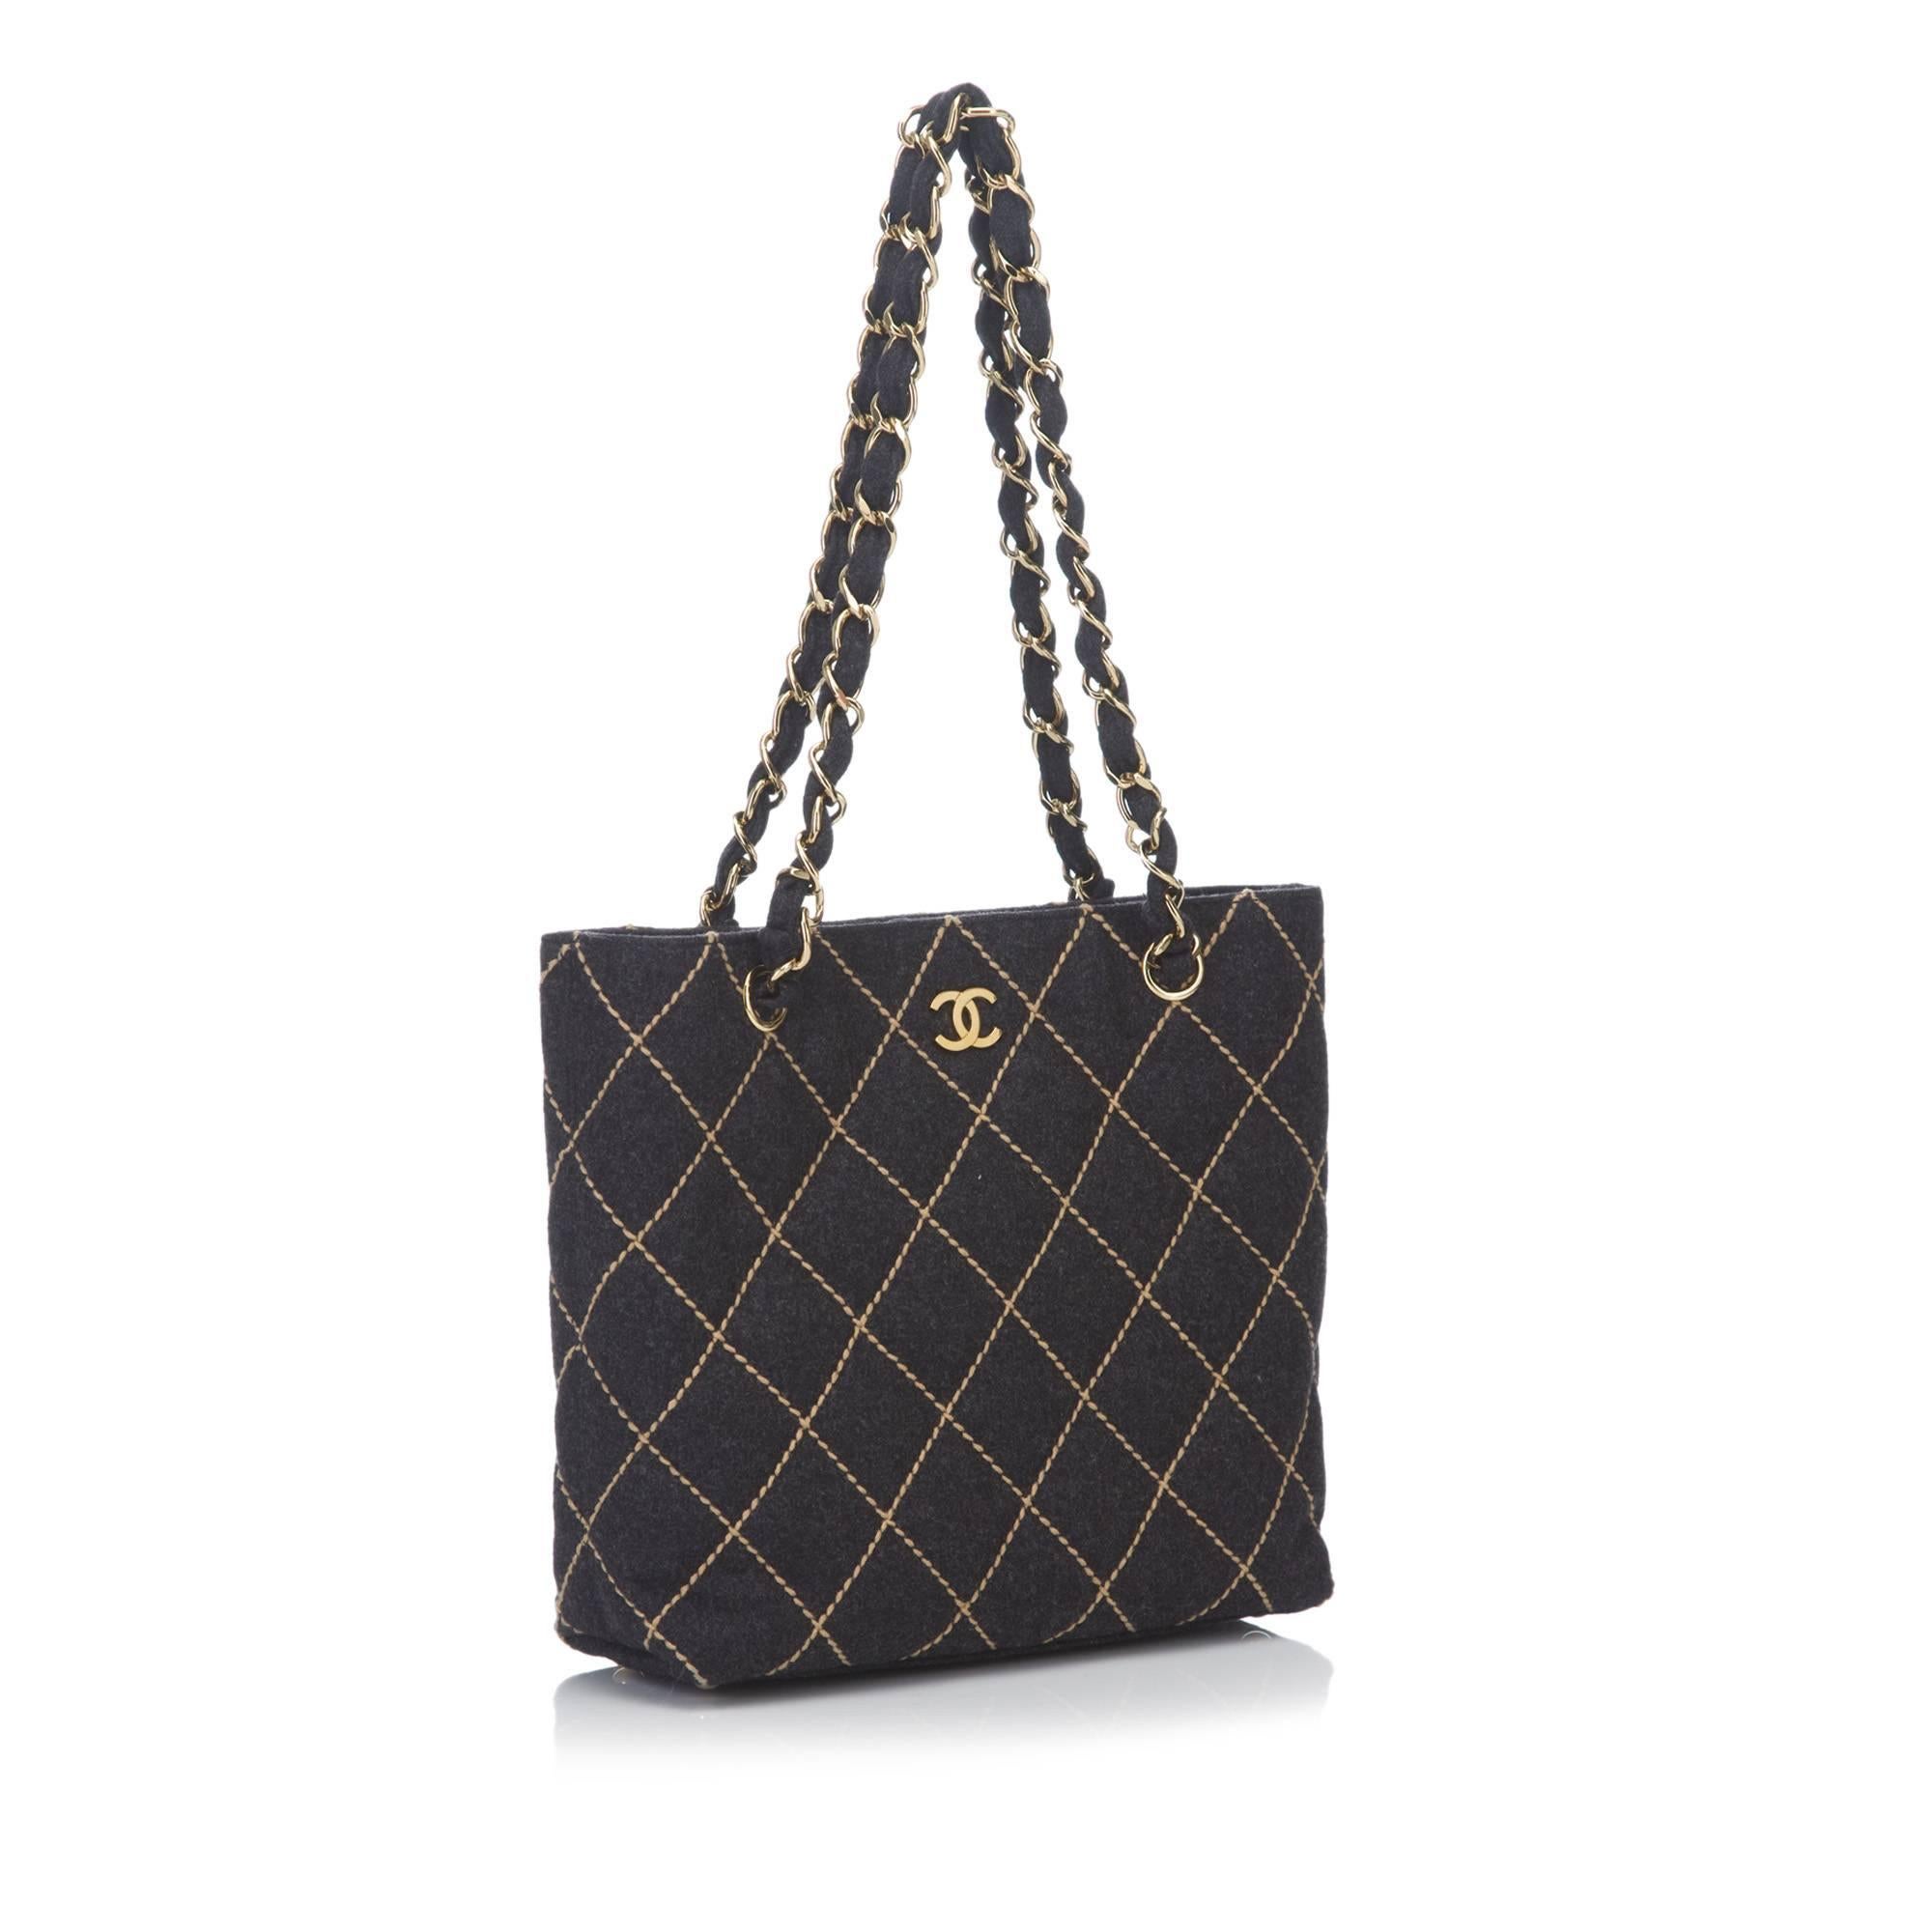 This shoulder bag features a wool body, gold-tone chains, top magnetic closure, and interior zip and slip pocket. 

It carries an AB condition rating.

Dimensions: 
Length 27 cm
Width 23 cm
Depth 9 cm
Shoulder Drop 24 cm

Inclusions: Dust